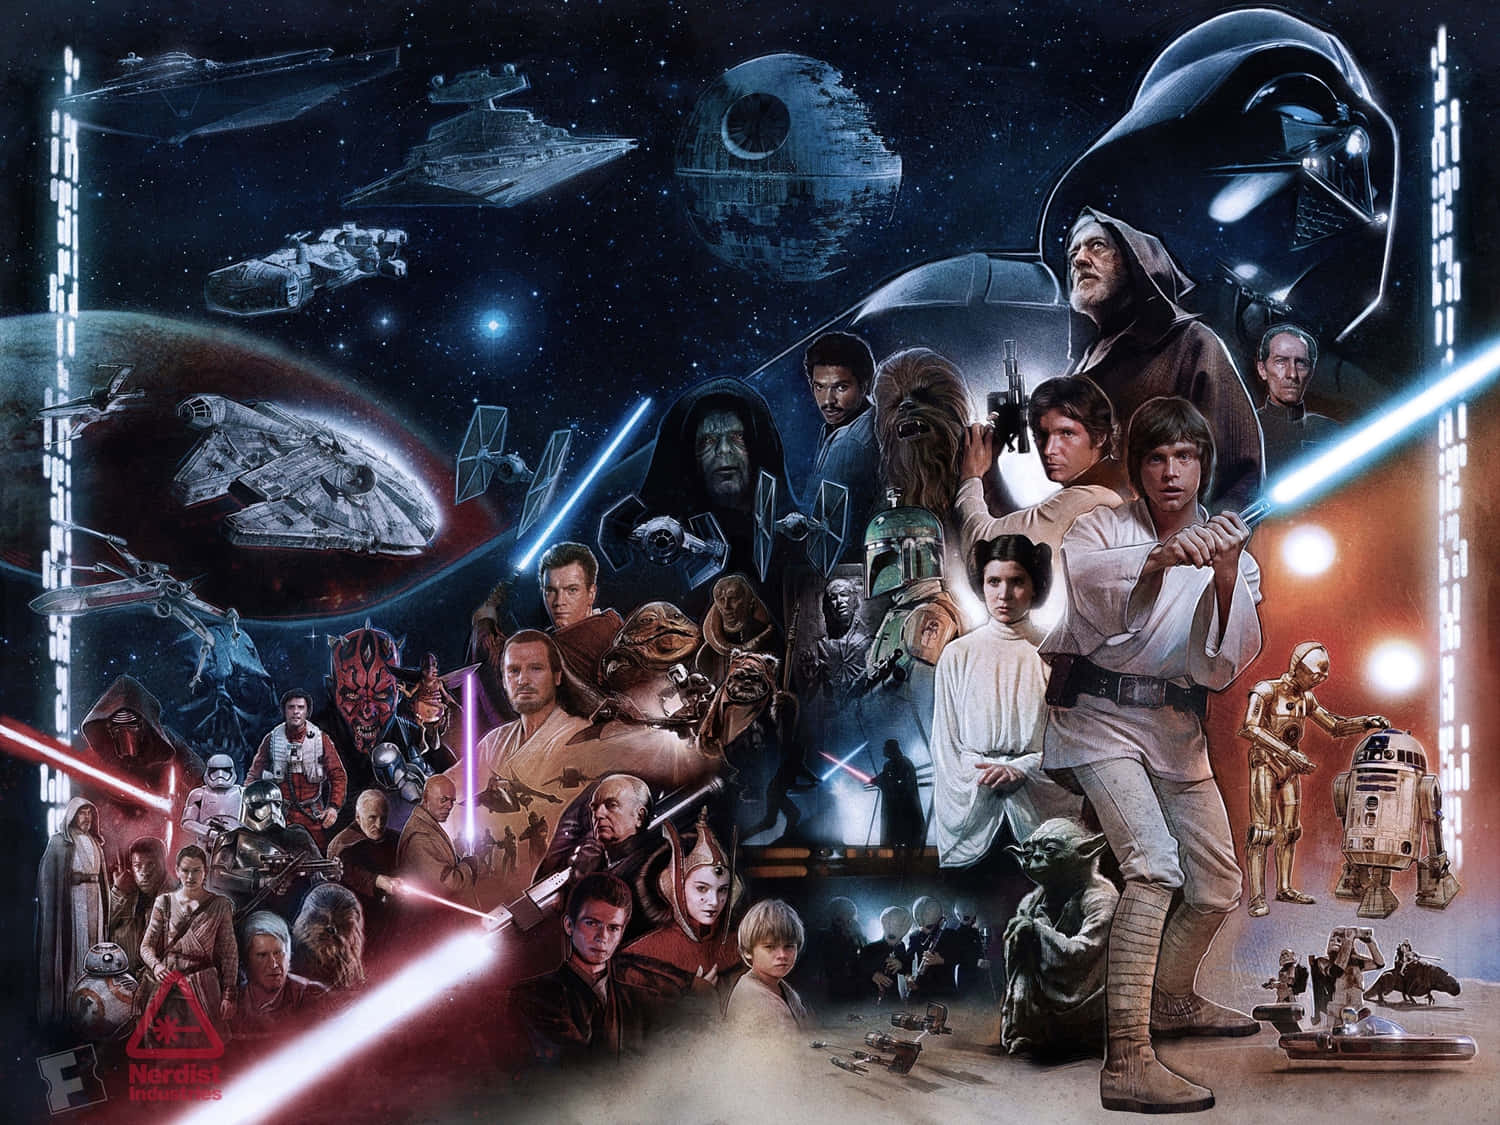 Meet the Greatest Characters of the Star Wars Universe Wallpaper